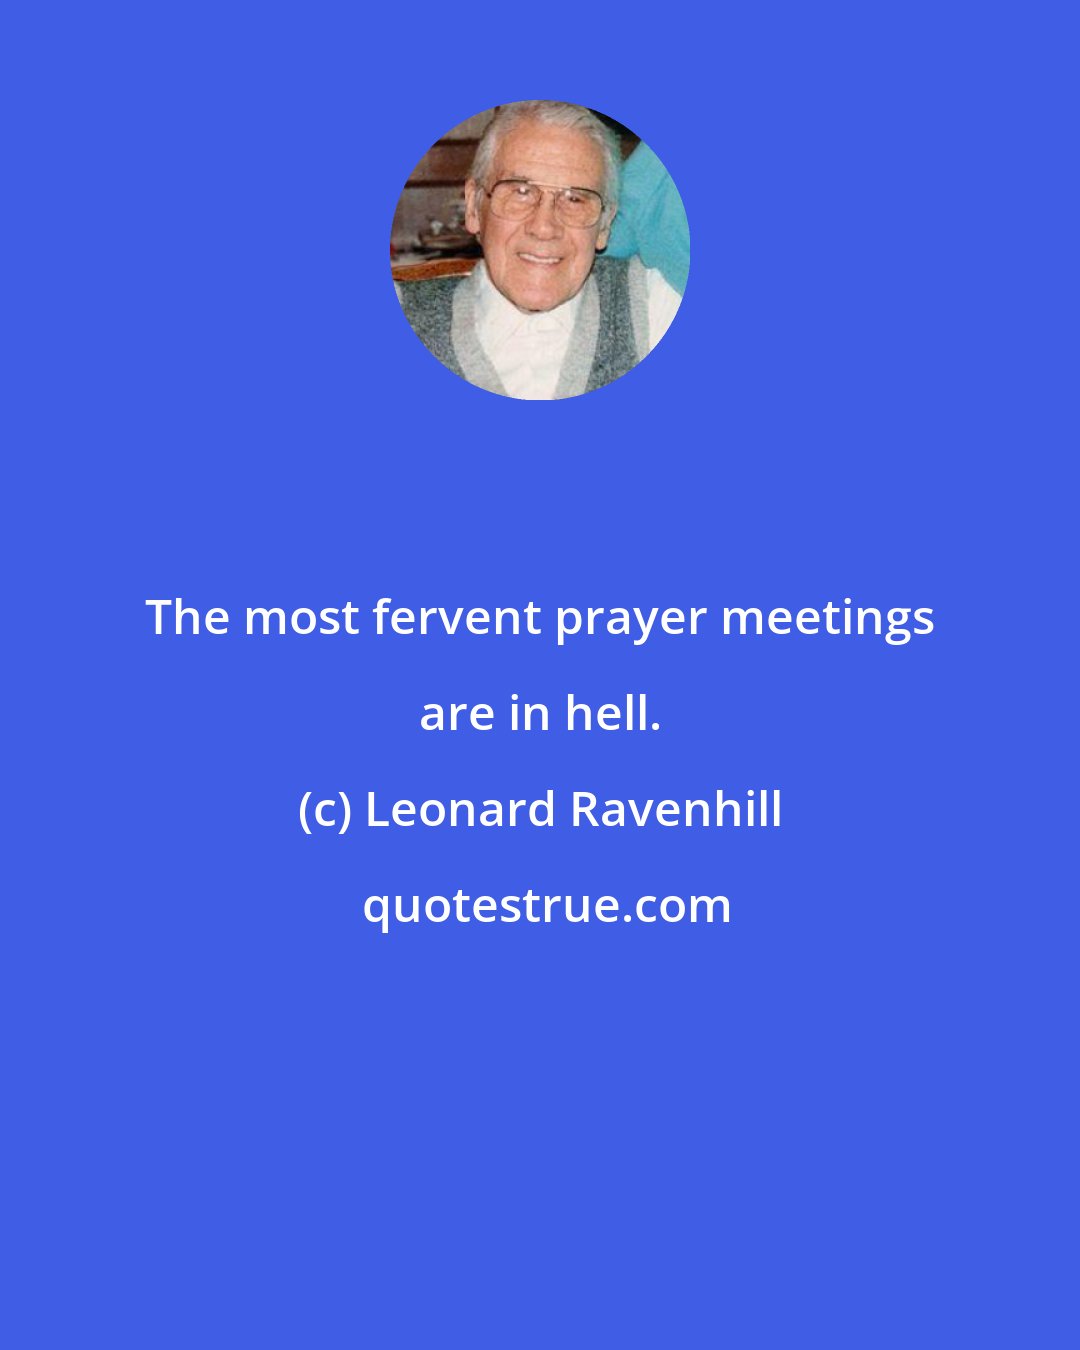 Leonard Ravenhill: The most fervent prayer meetings are in hell.